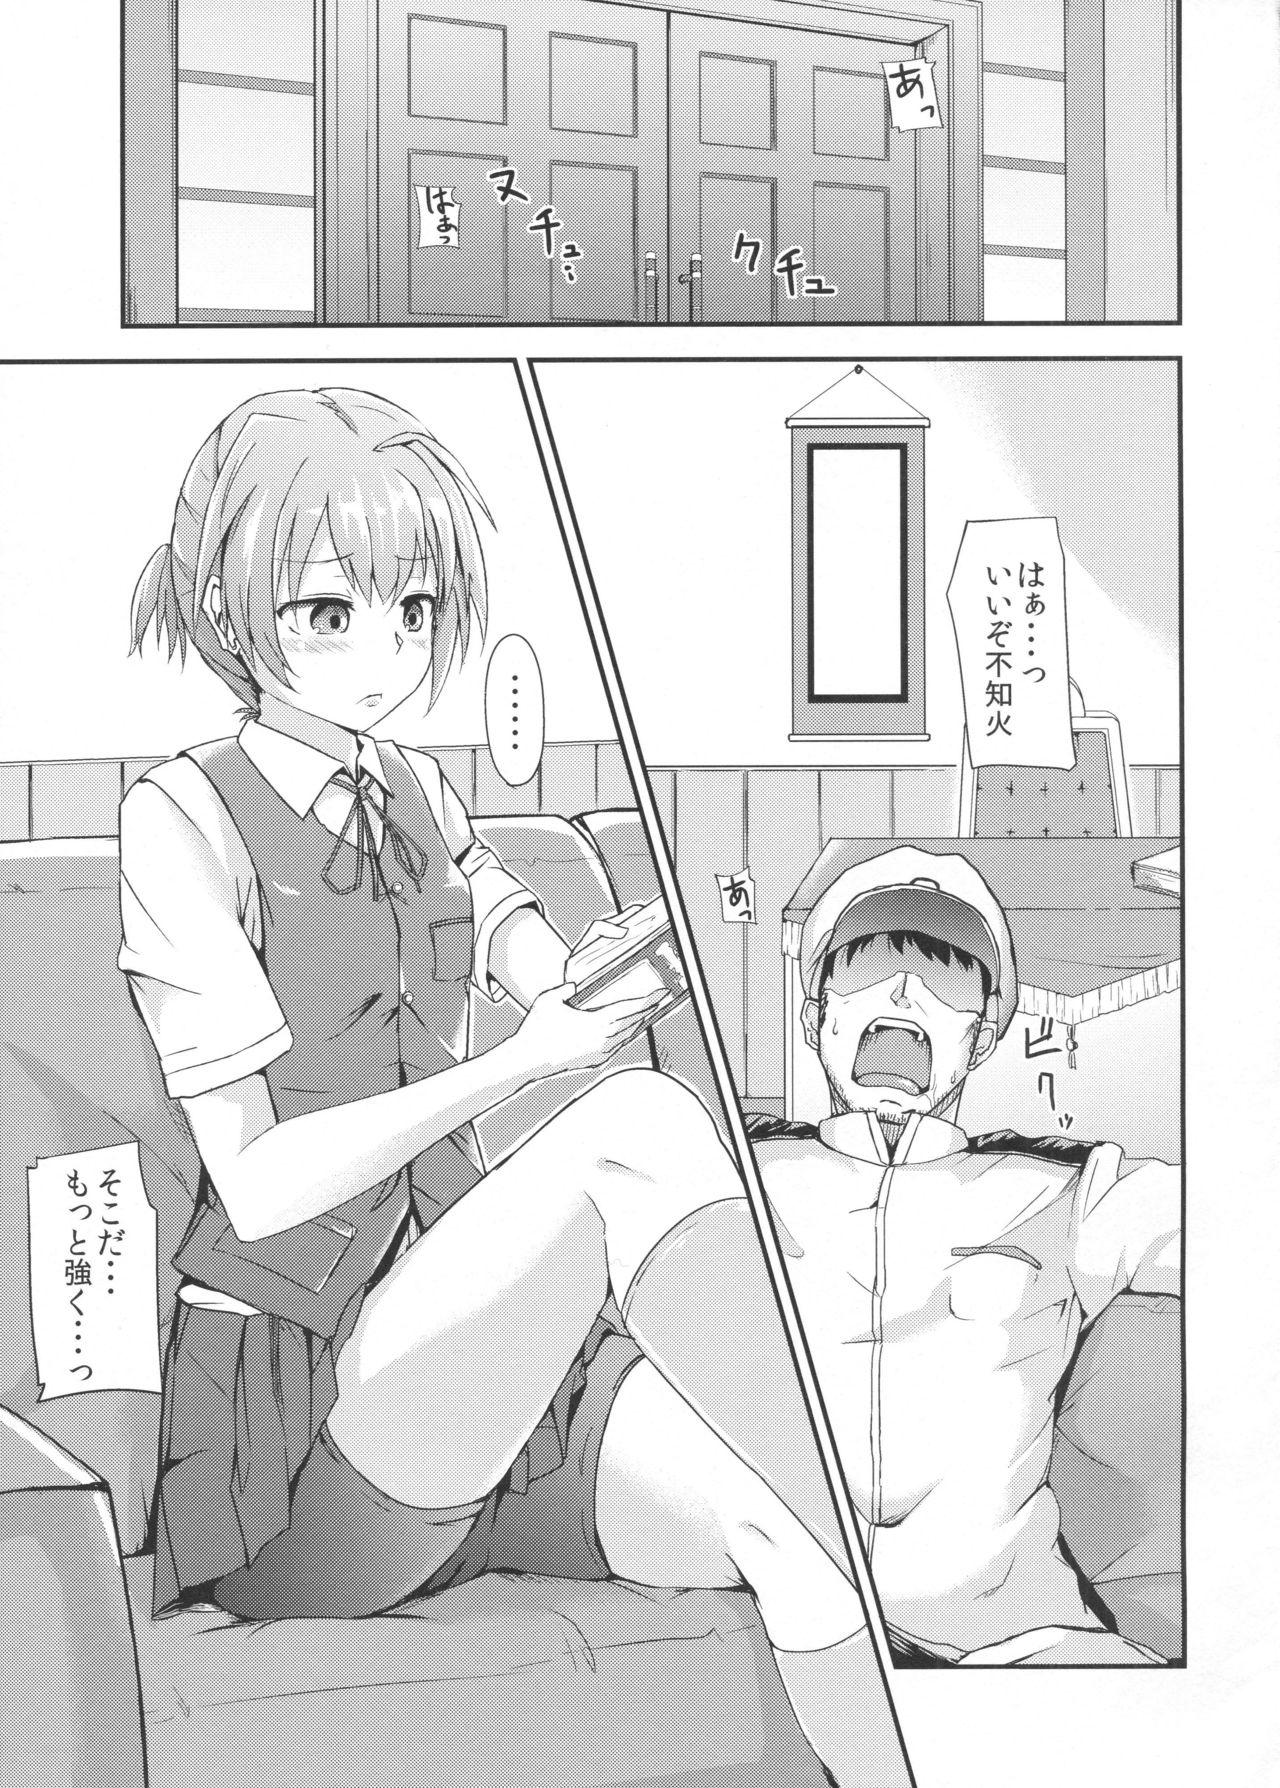 Farting Tsun to Dere Nui - Kantai collection Ex Girlfriend - Page 4